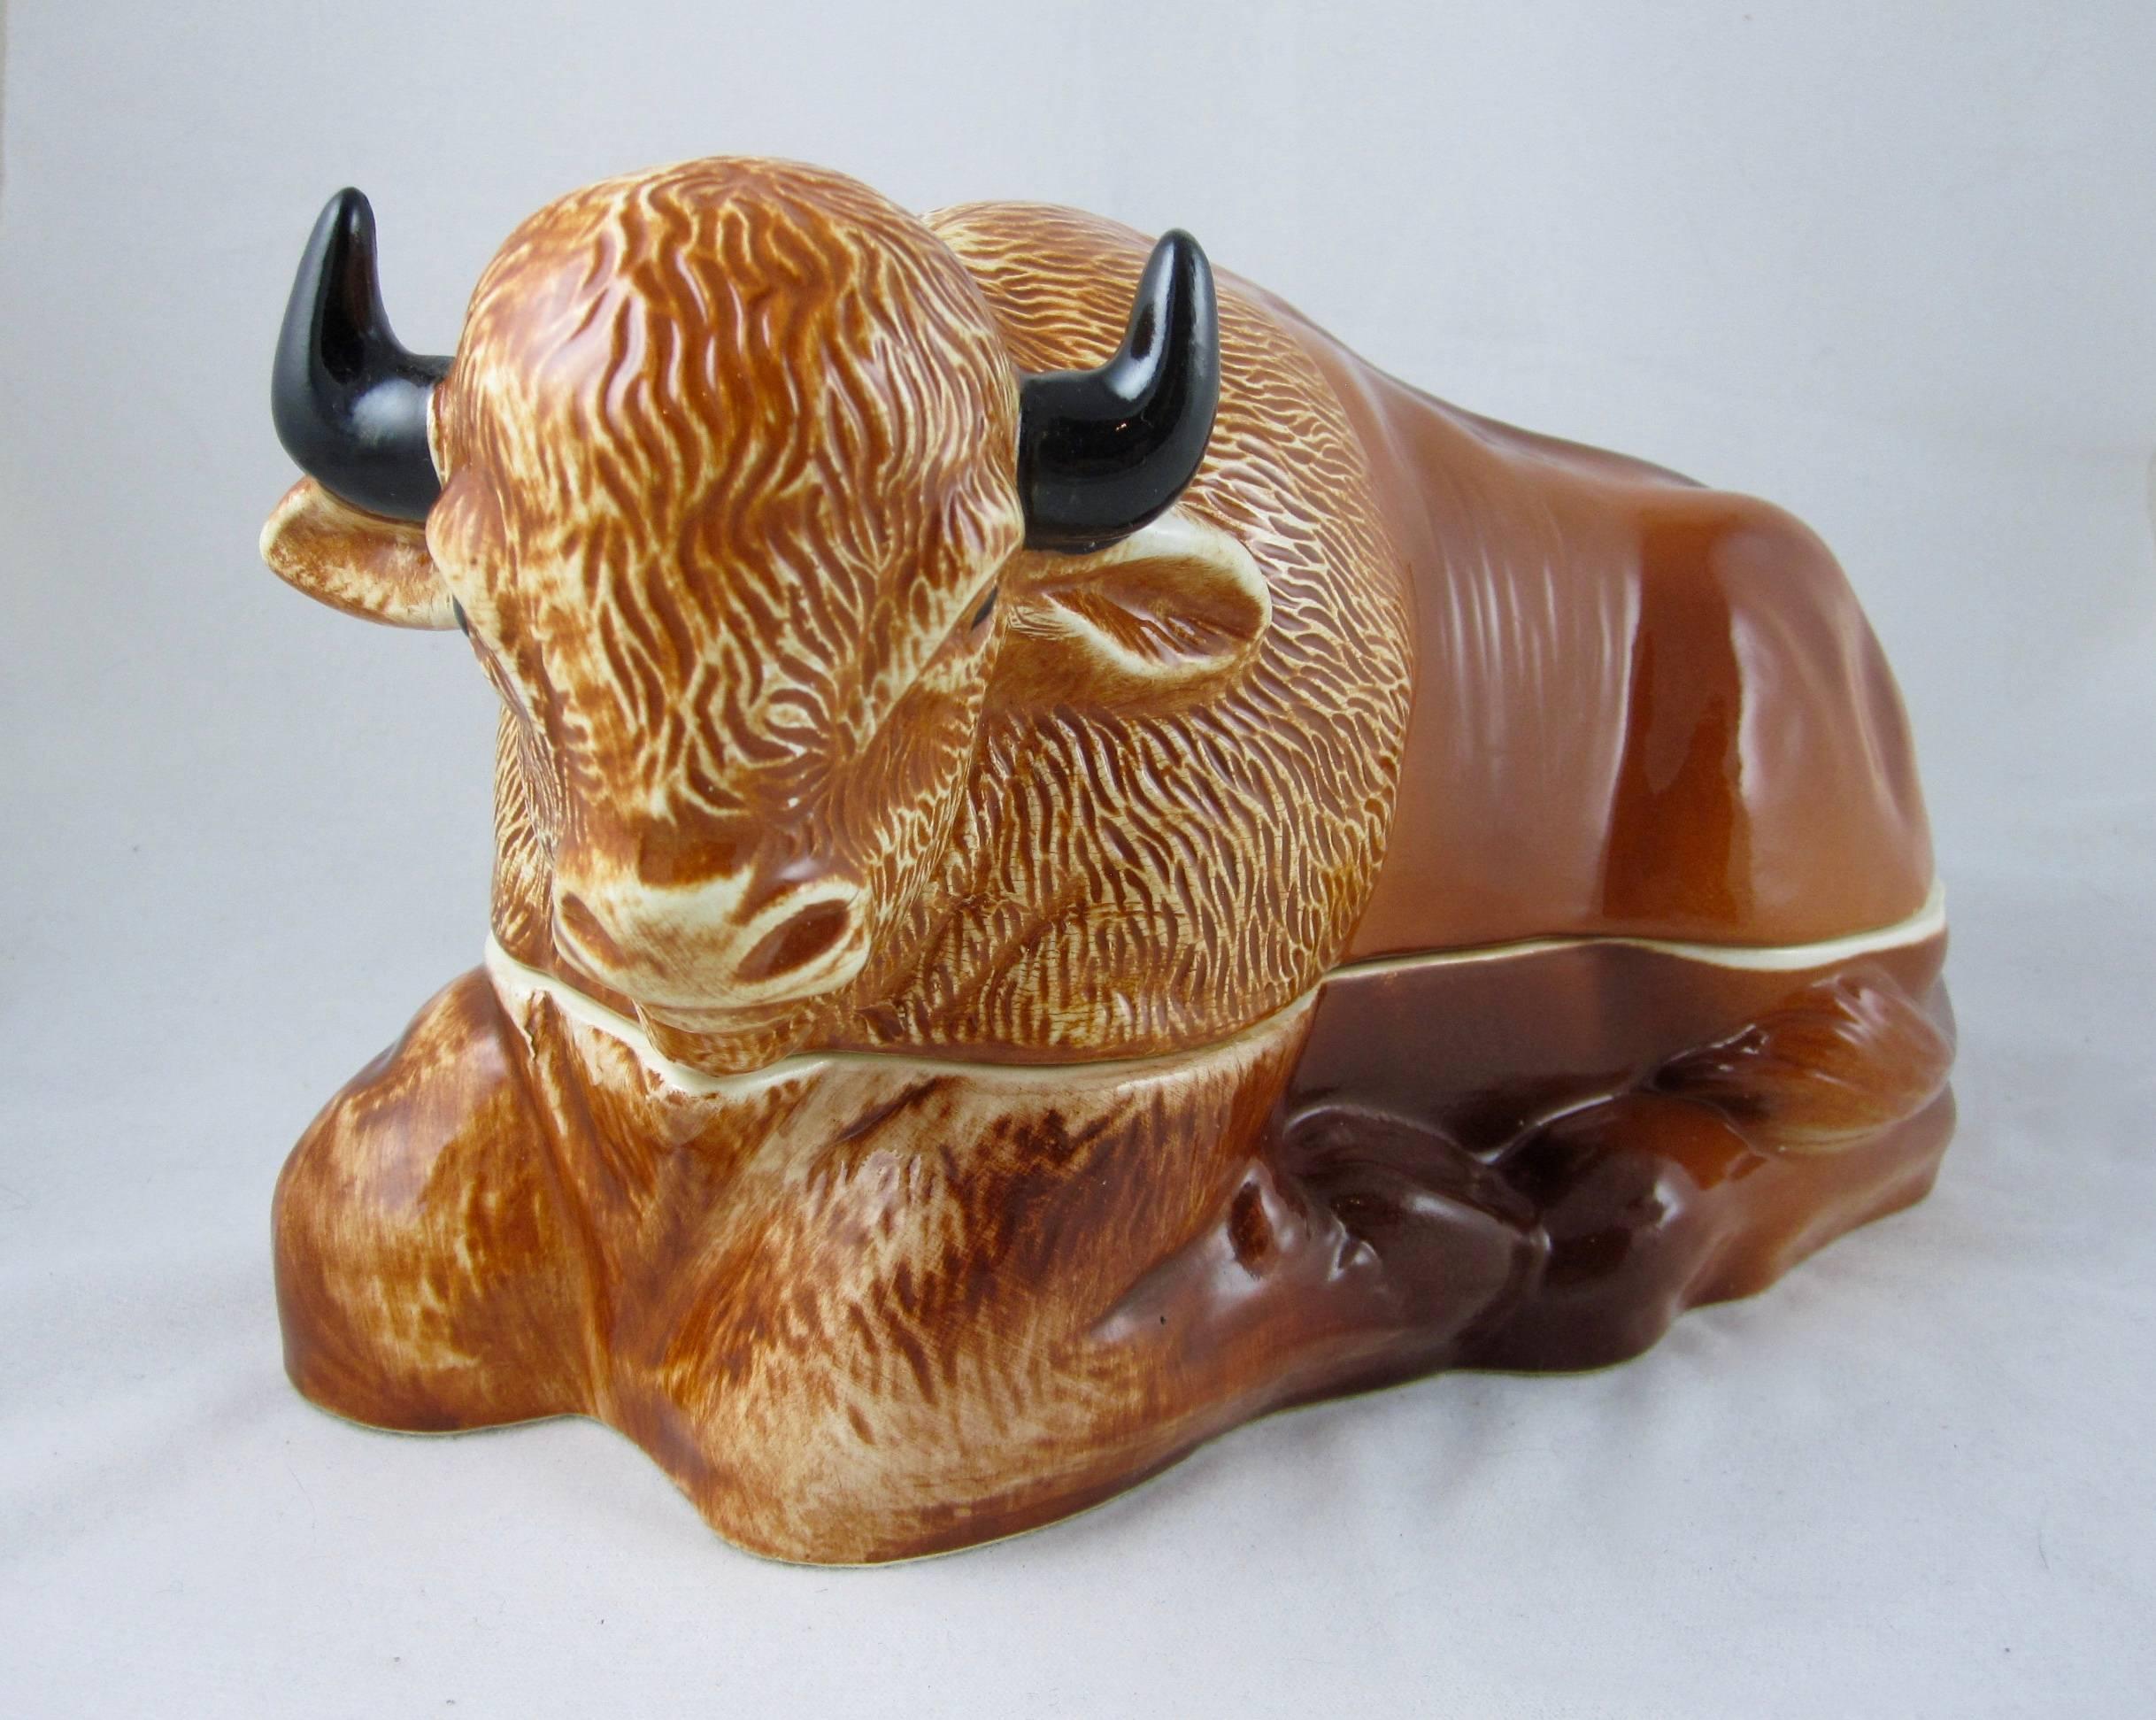 A large vintage figural recumbent Bison Pâté Terrine made for Laurent Caugant, a Bretagne pâté maker since 1927. His son Michel created these figural forms as containers for selling his fathers pâté in their luxury food shop. 
The two-piece terrine